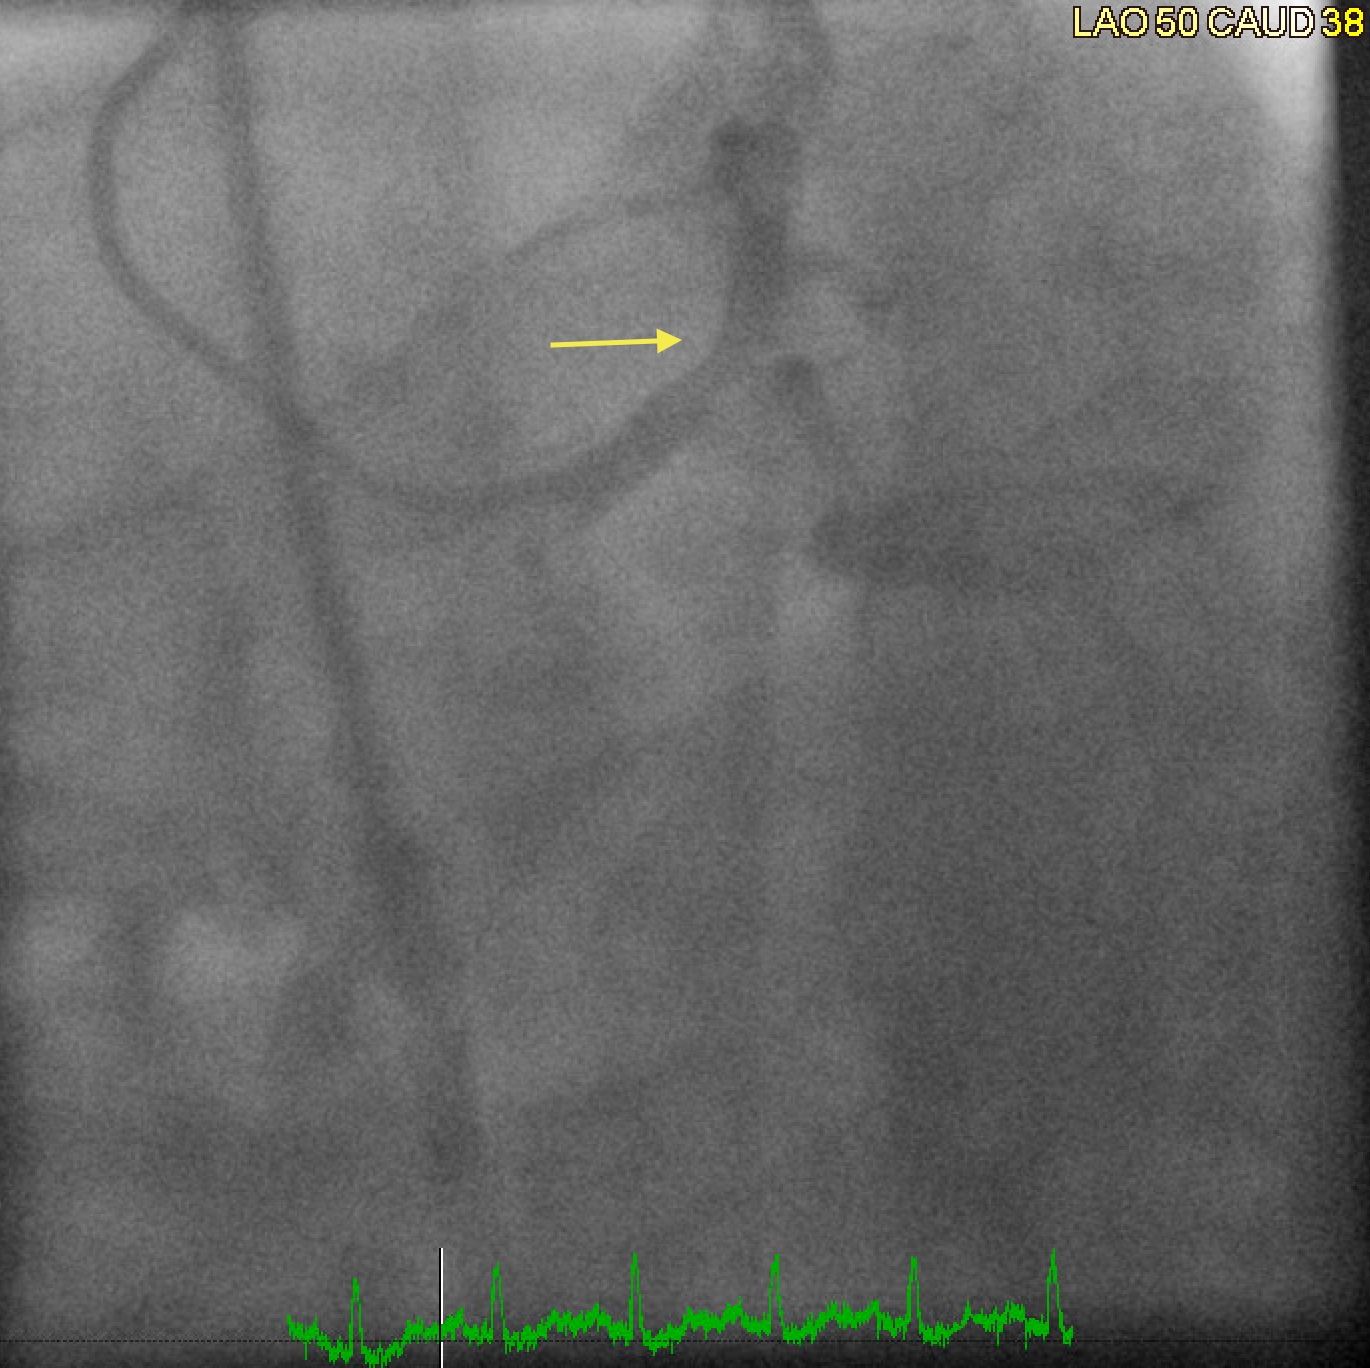 Coronary angiogram in a patient with radiation-induced coronary artery disease showing severe obstructive left main disease with bifurcation lesion affecting the Ostia of the left anterior descending artery and the left circumflex artery.